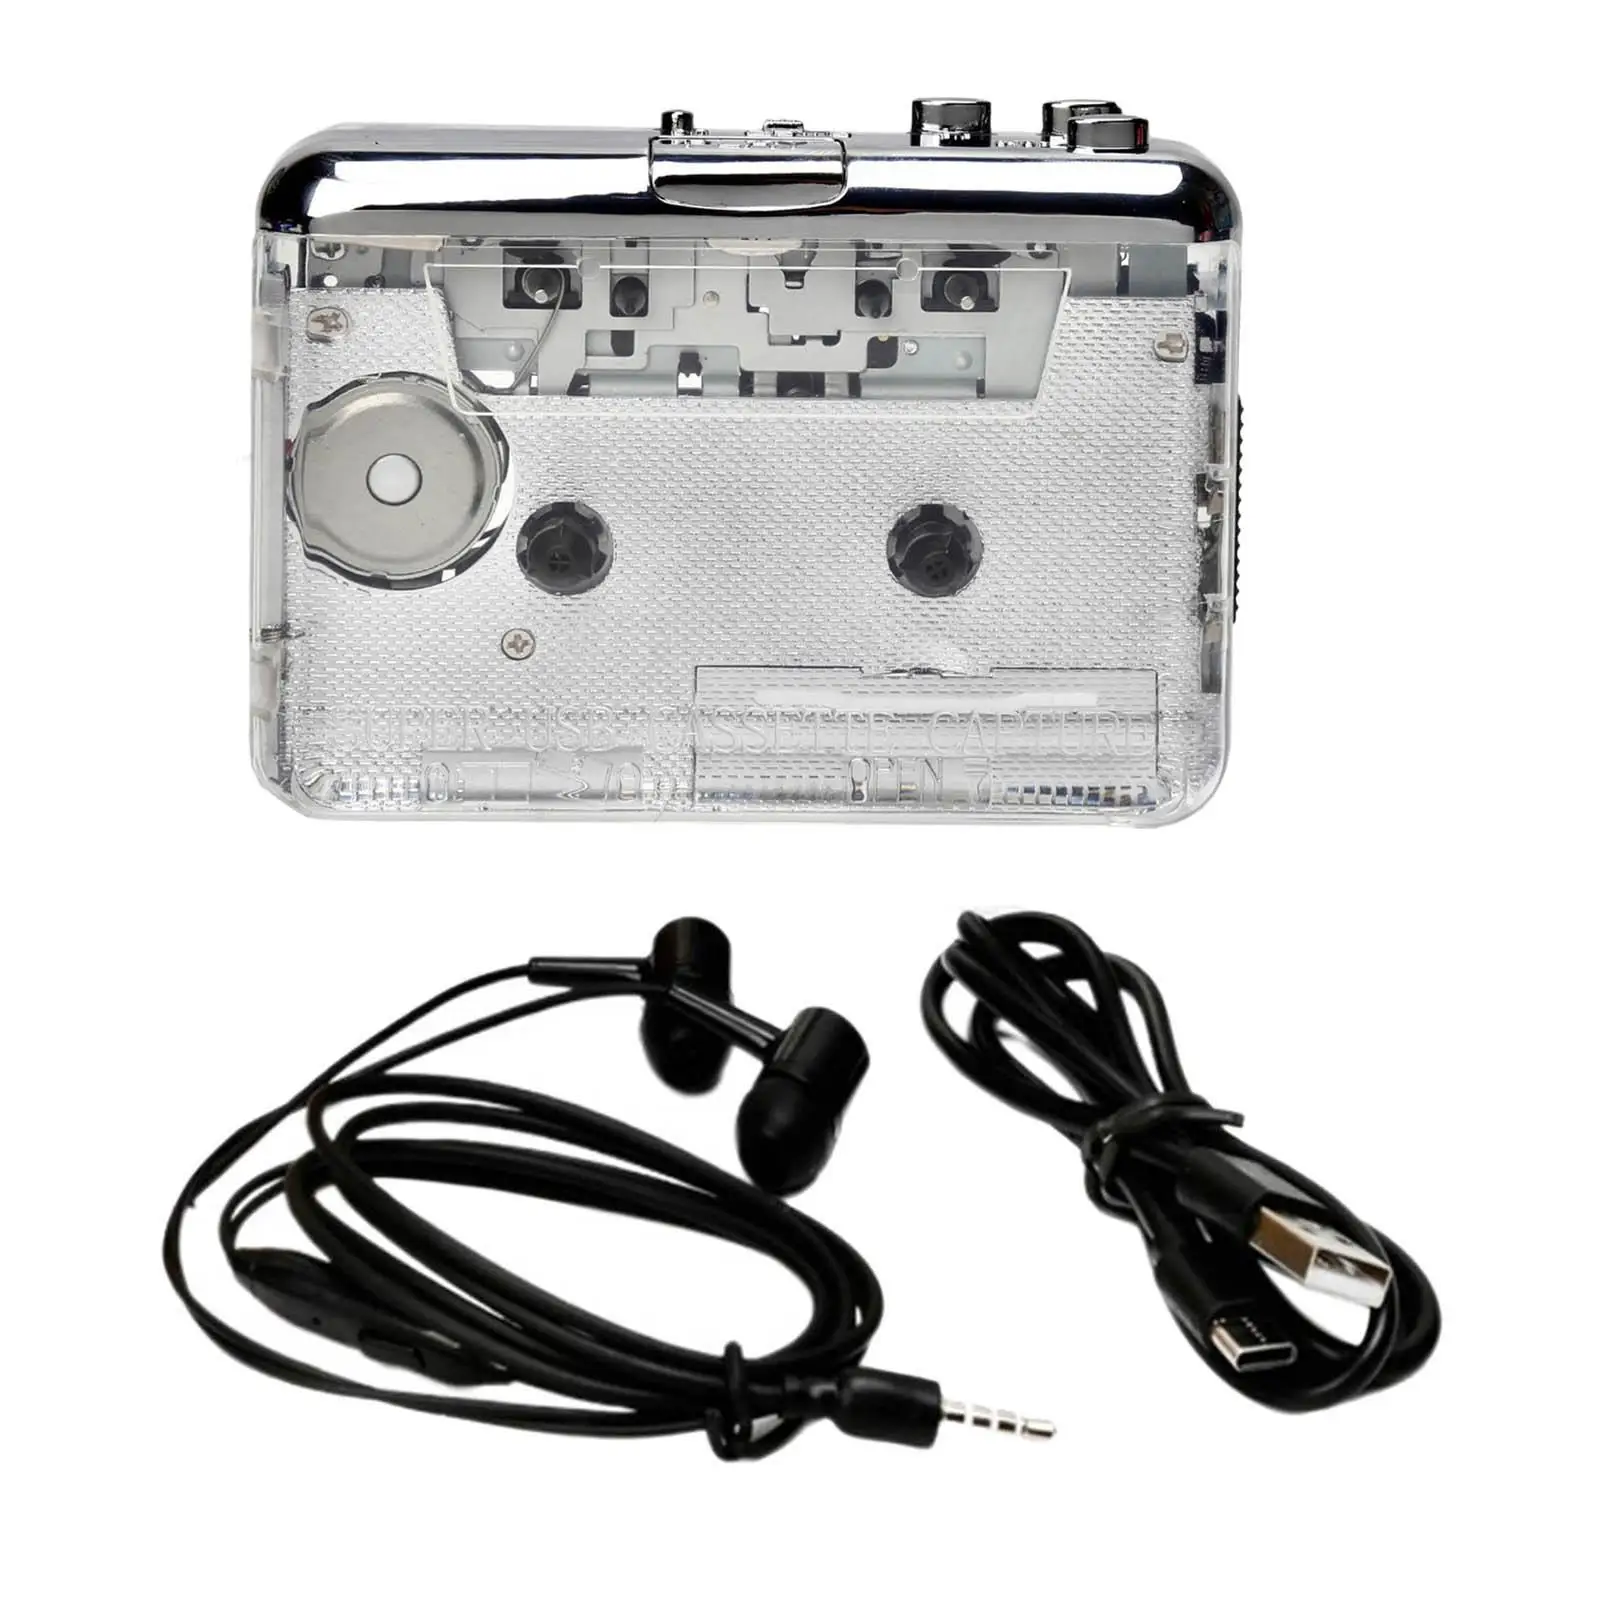 USB Cassette Tape to MP3 CD Cassette Player Type C Cable Powered Batteries Powered Converter for Laptop PC for Windows XP/7